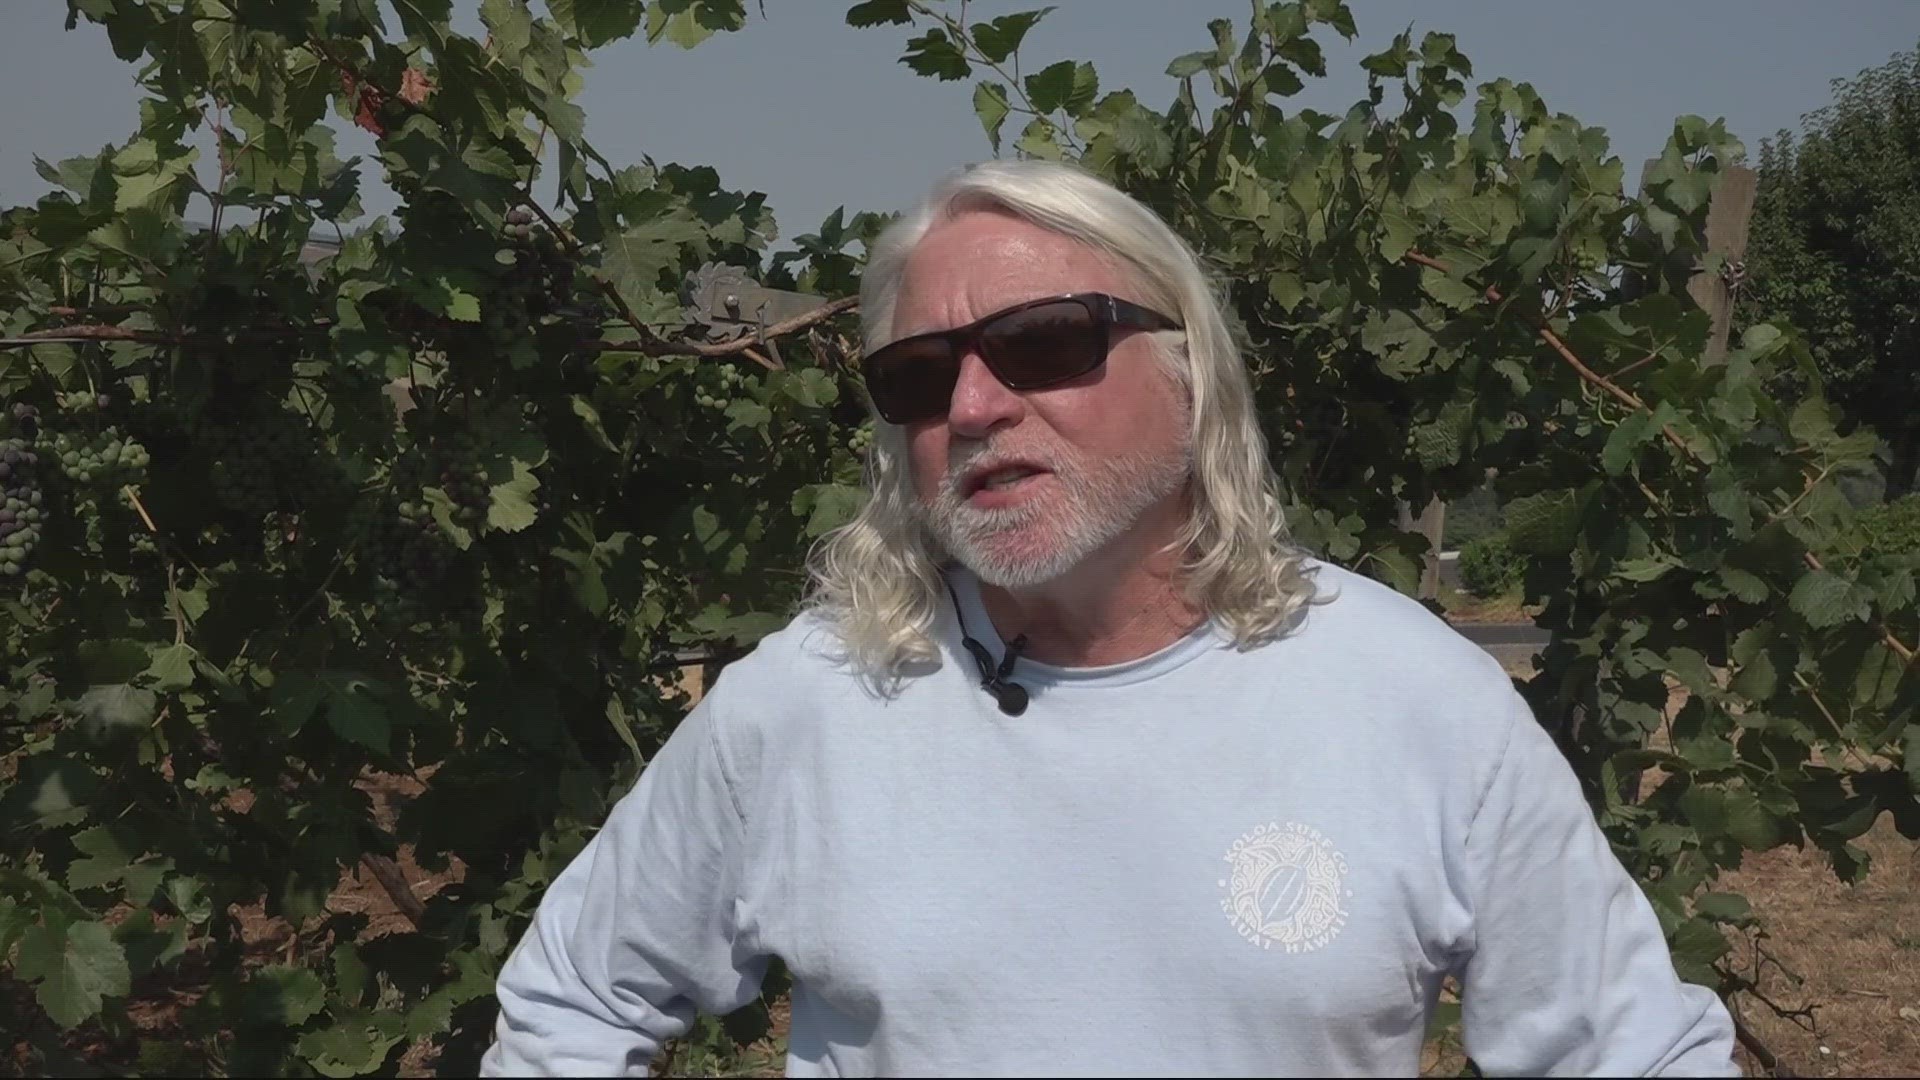 Employees from Willamette Valley Vineyards are implementing various techniques in an effort to keep their fruits safe.